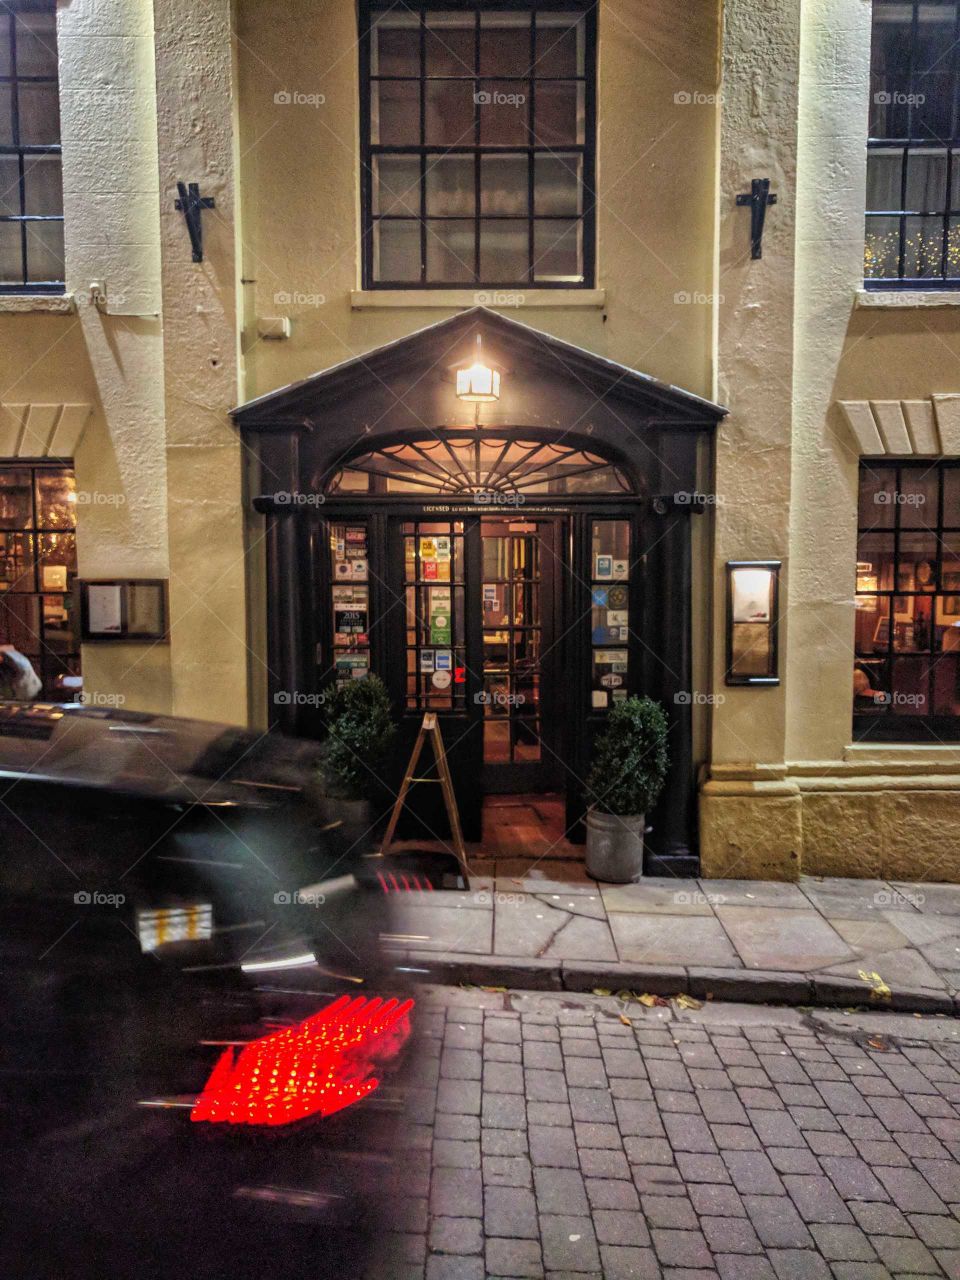 The busy nature of the tourist season in this small town is really emphasised by the blur of the passing car and the lively-looking hotel with its beautifully inviting front doors.